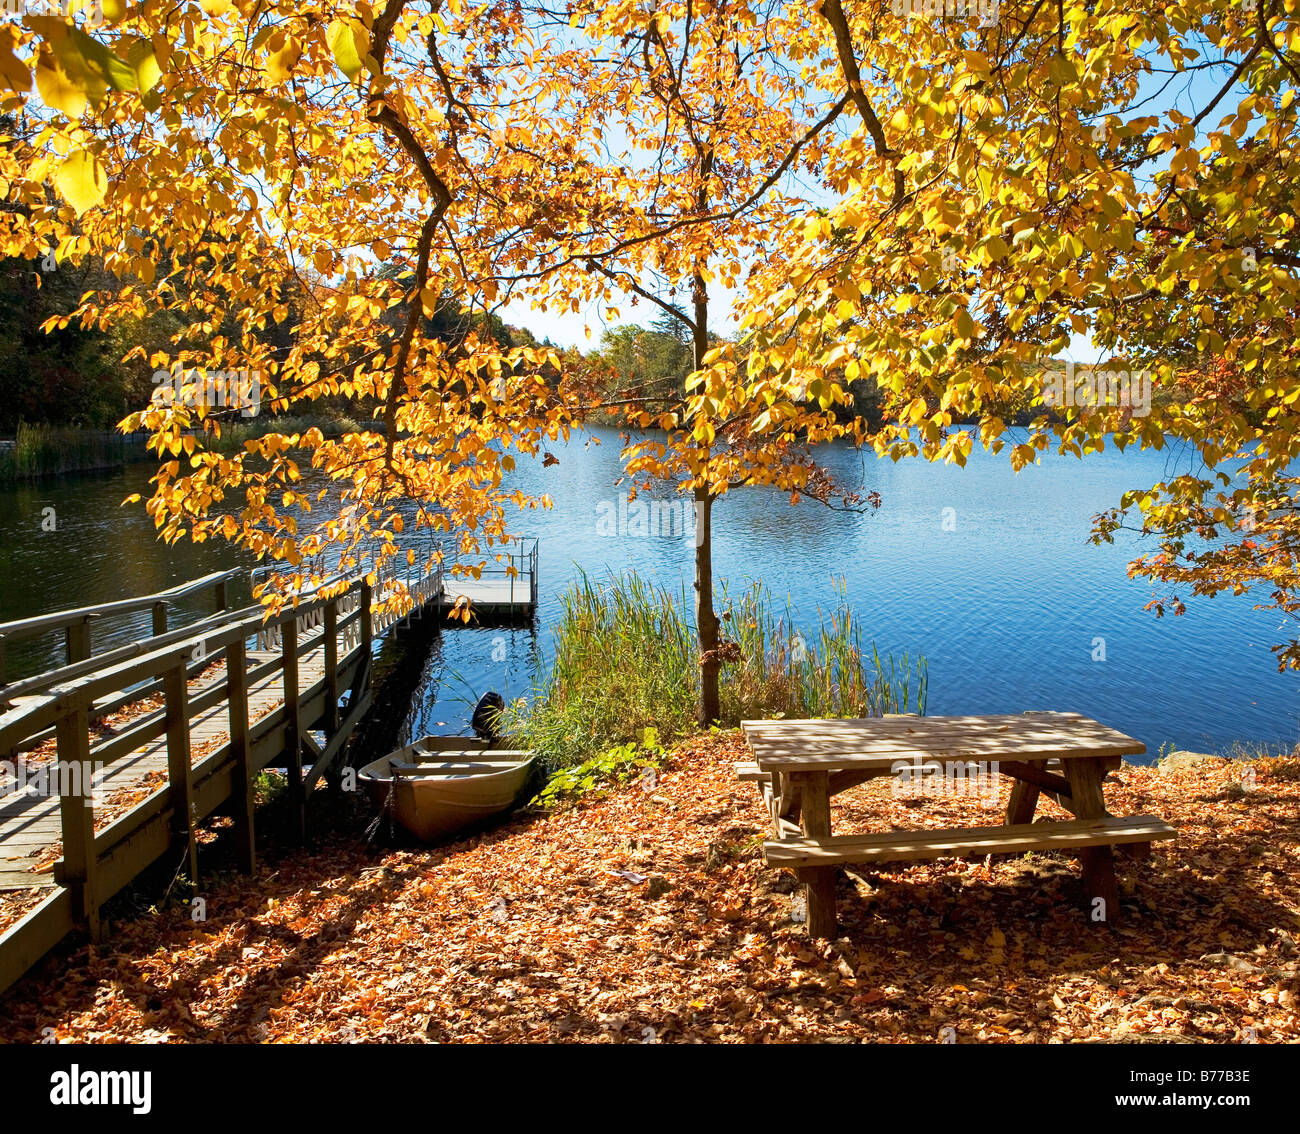 Picnic bench autumn leaves near dock and lake Stock Photo